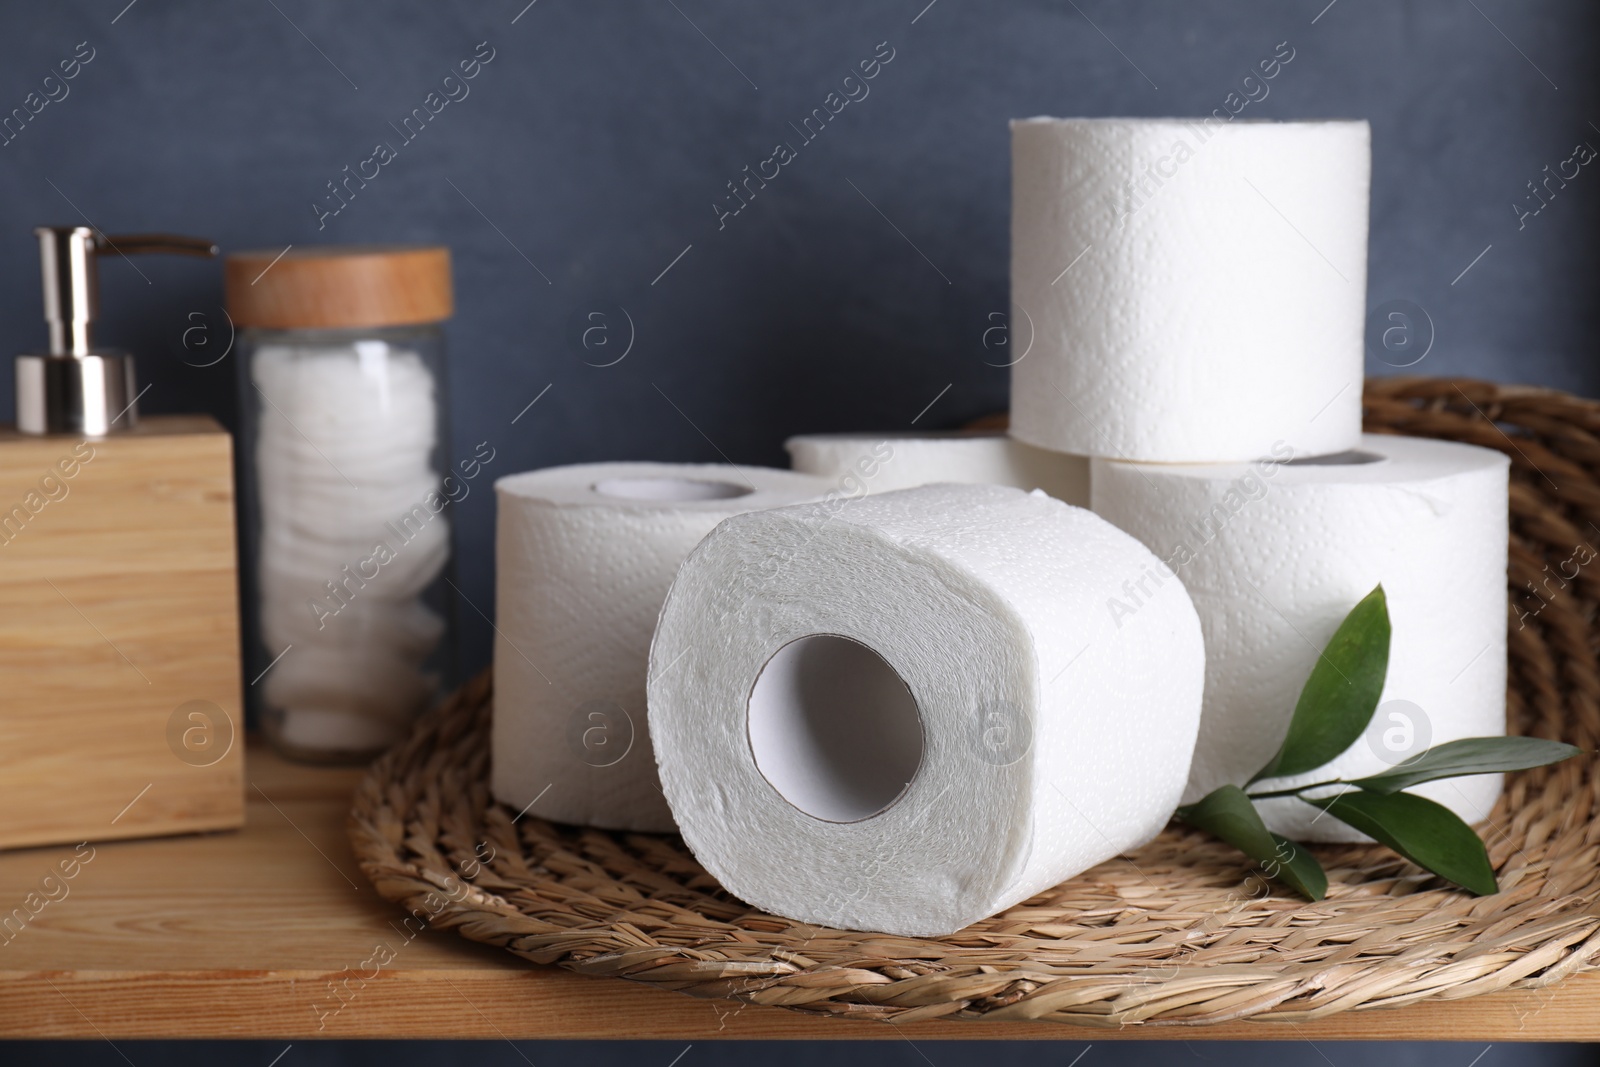 Photo of Toilet paper rolls, green leaves, dispenser and cotton pads on wooden table